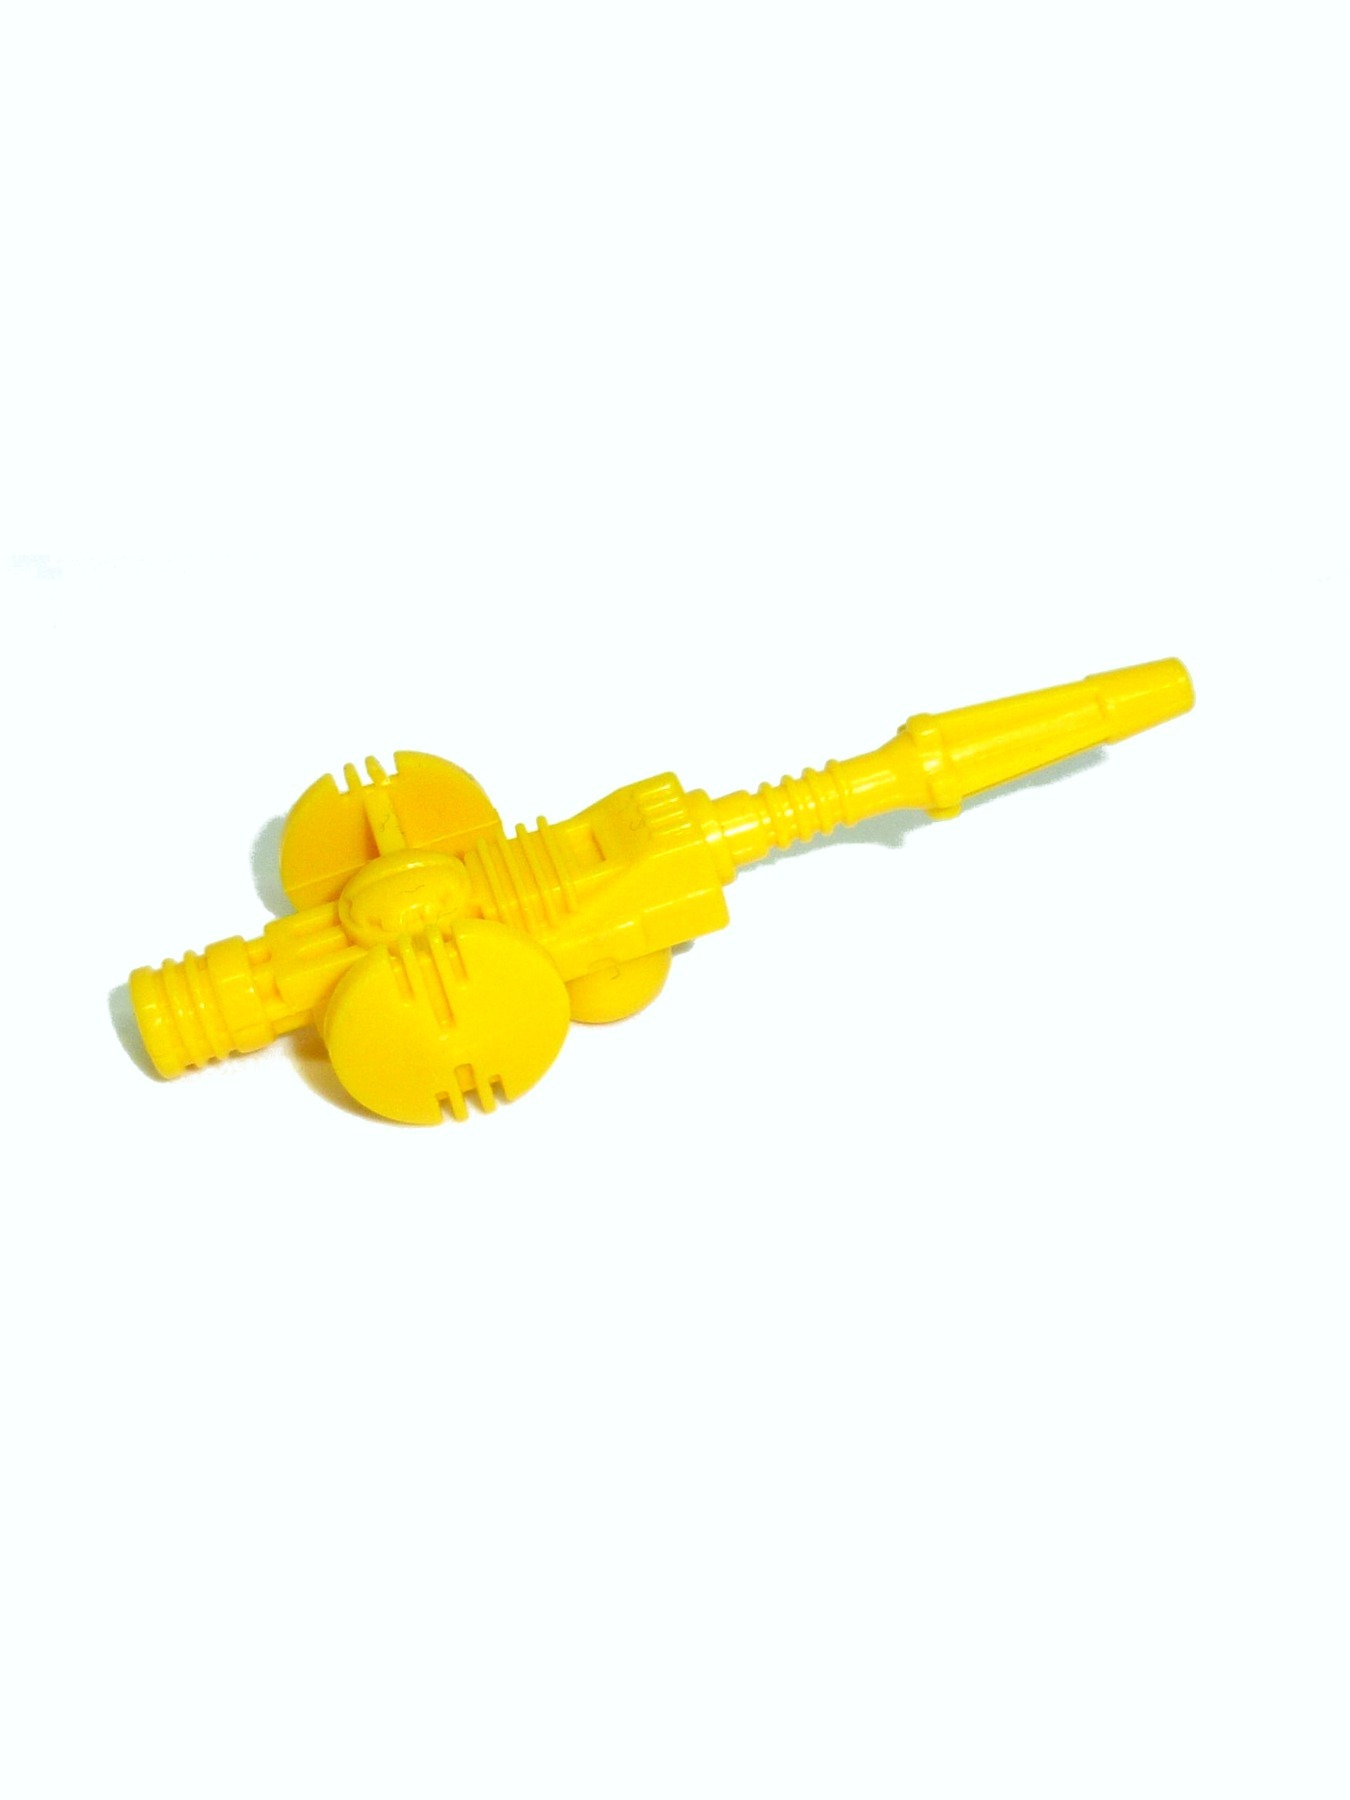 yellow cannon spare part